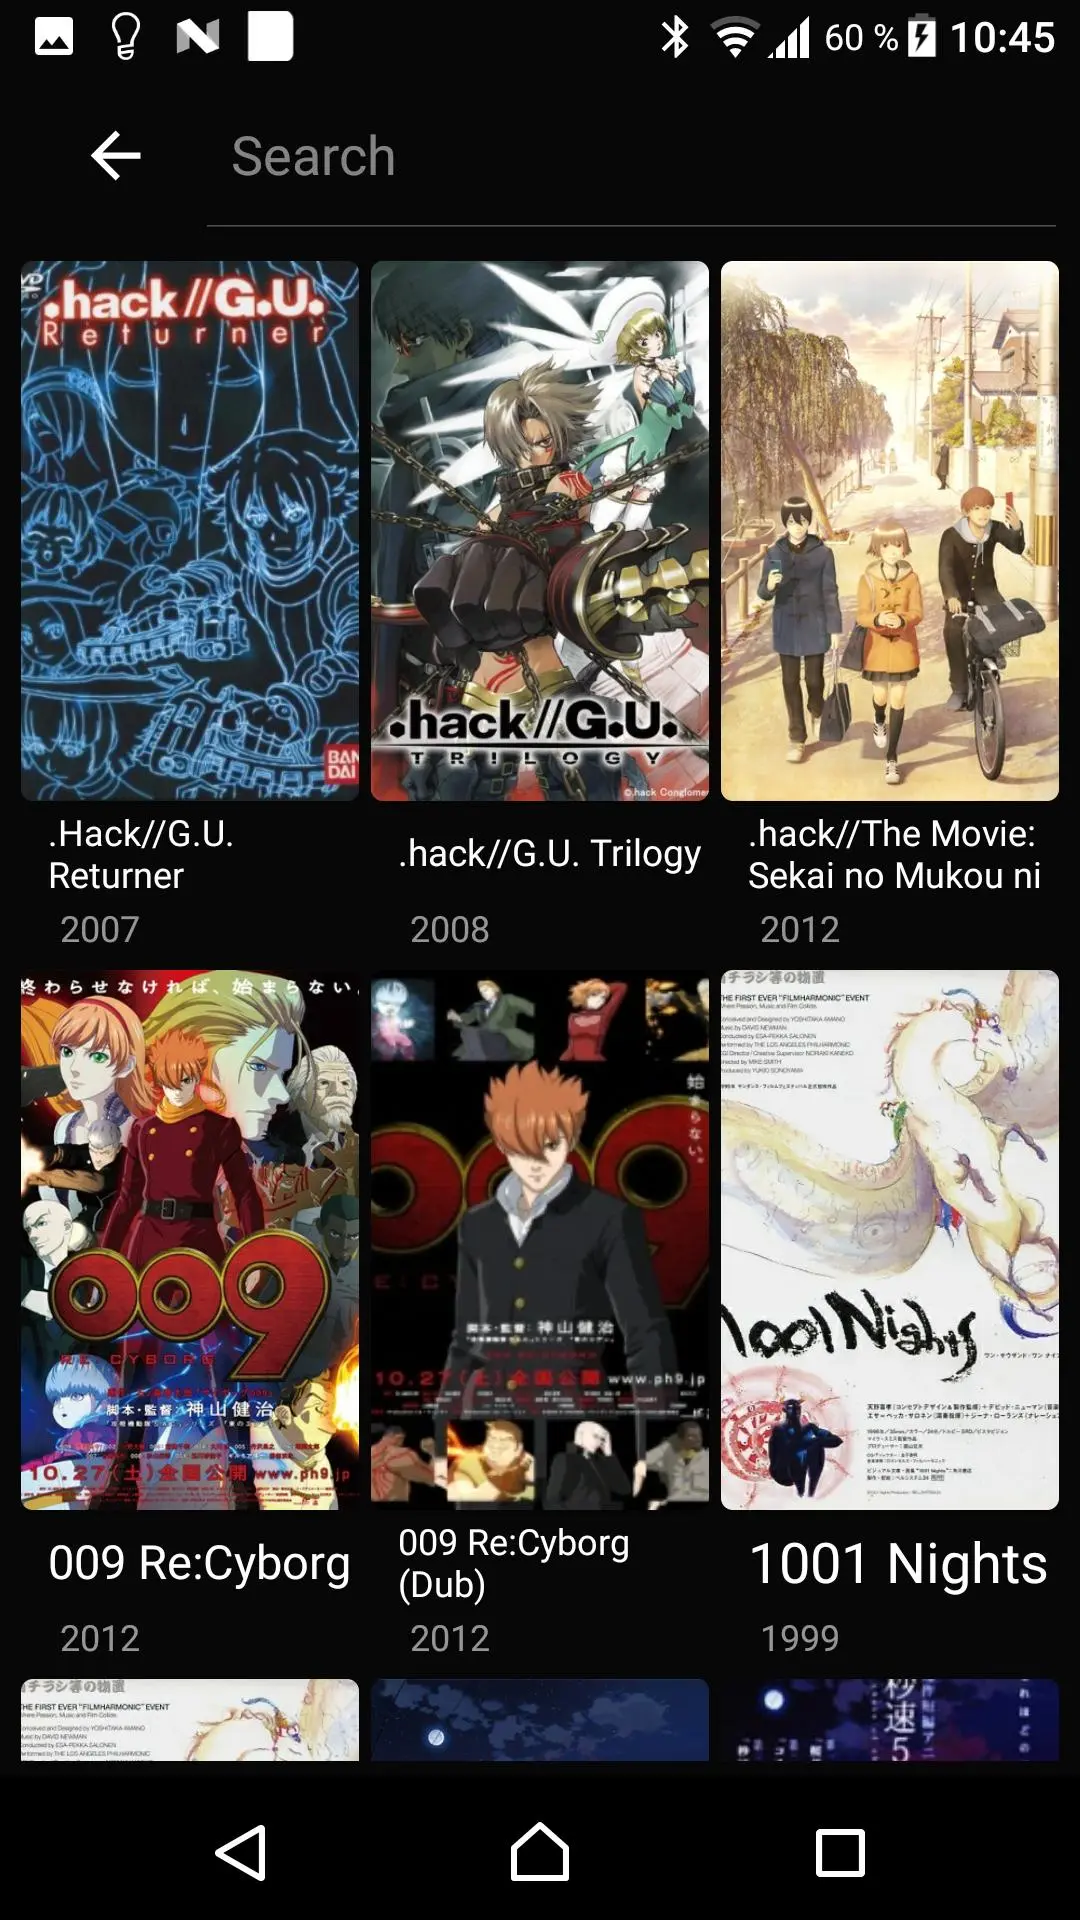 Download AnimeOnline tv - Watch anime online free android on PC